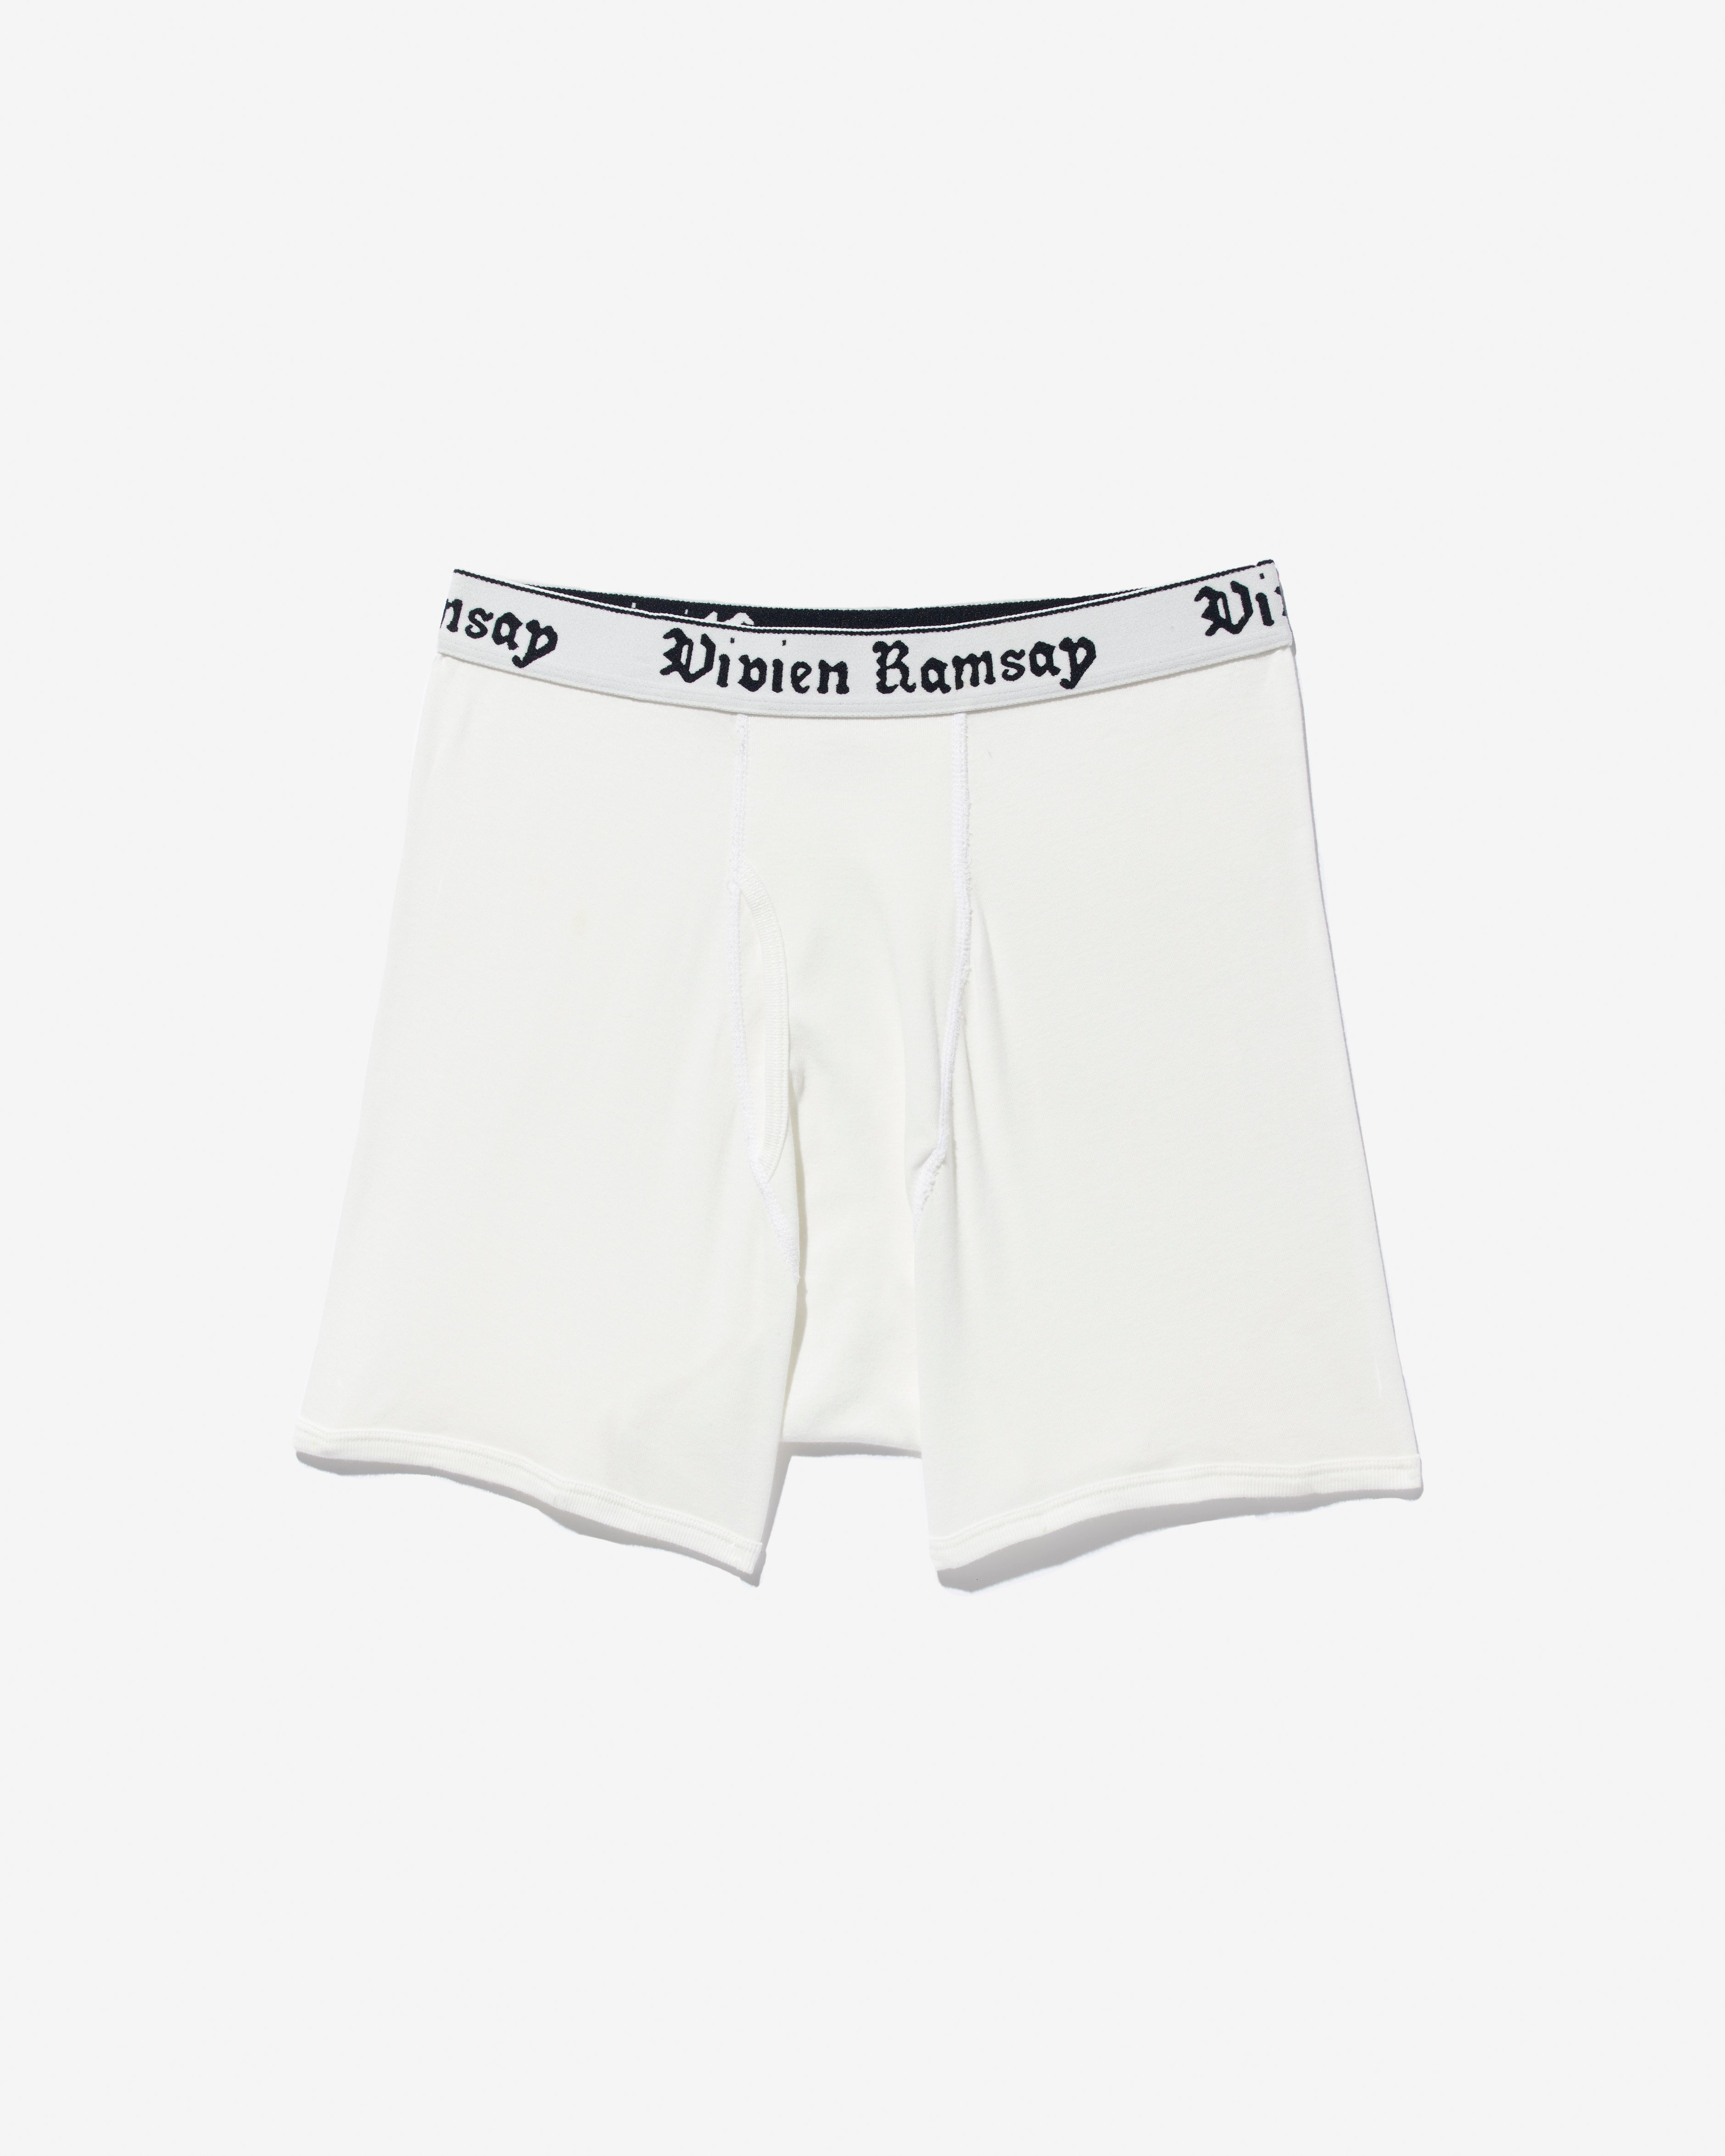 Boxer Brief White (3 Pack)